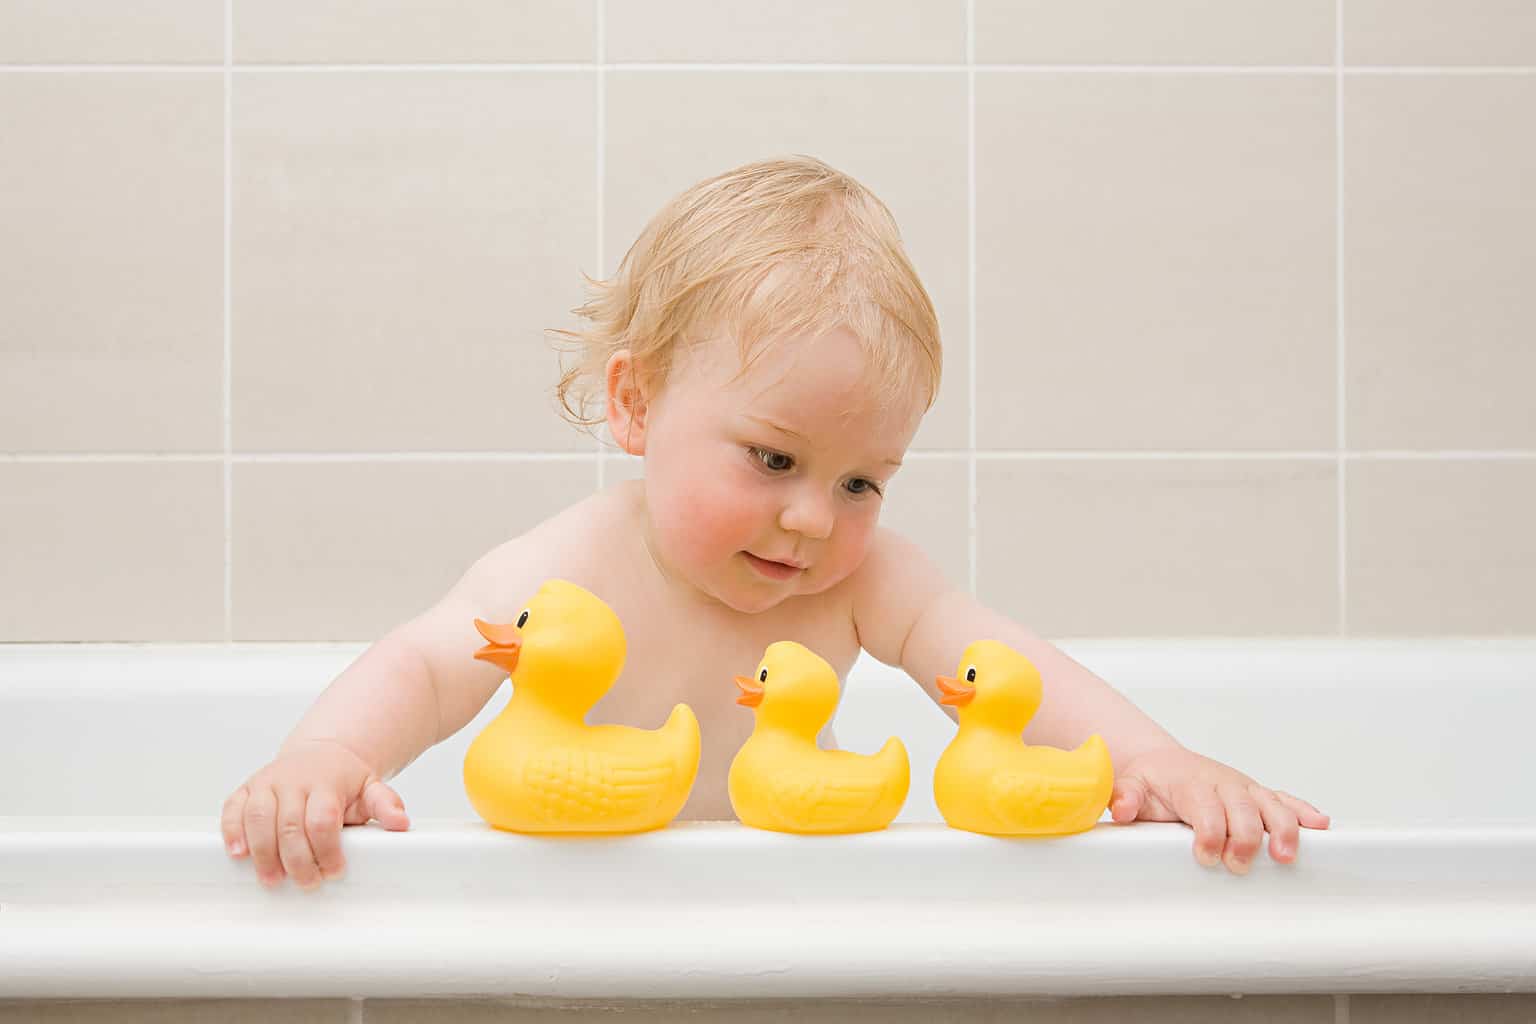 A Baby Boy Looking At A Row Of Rubber Ducks, Baby Safety Shower, preventable childhood injuries, Safe sleep, Preventing falls, Water safety, Poison prevention